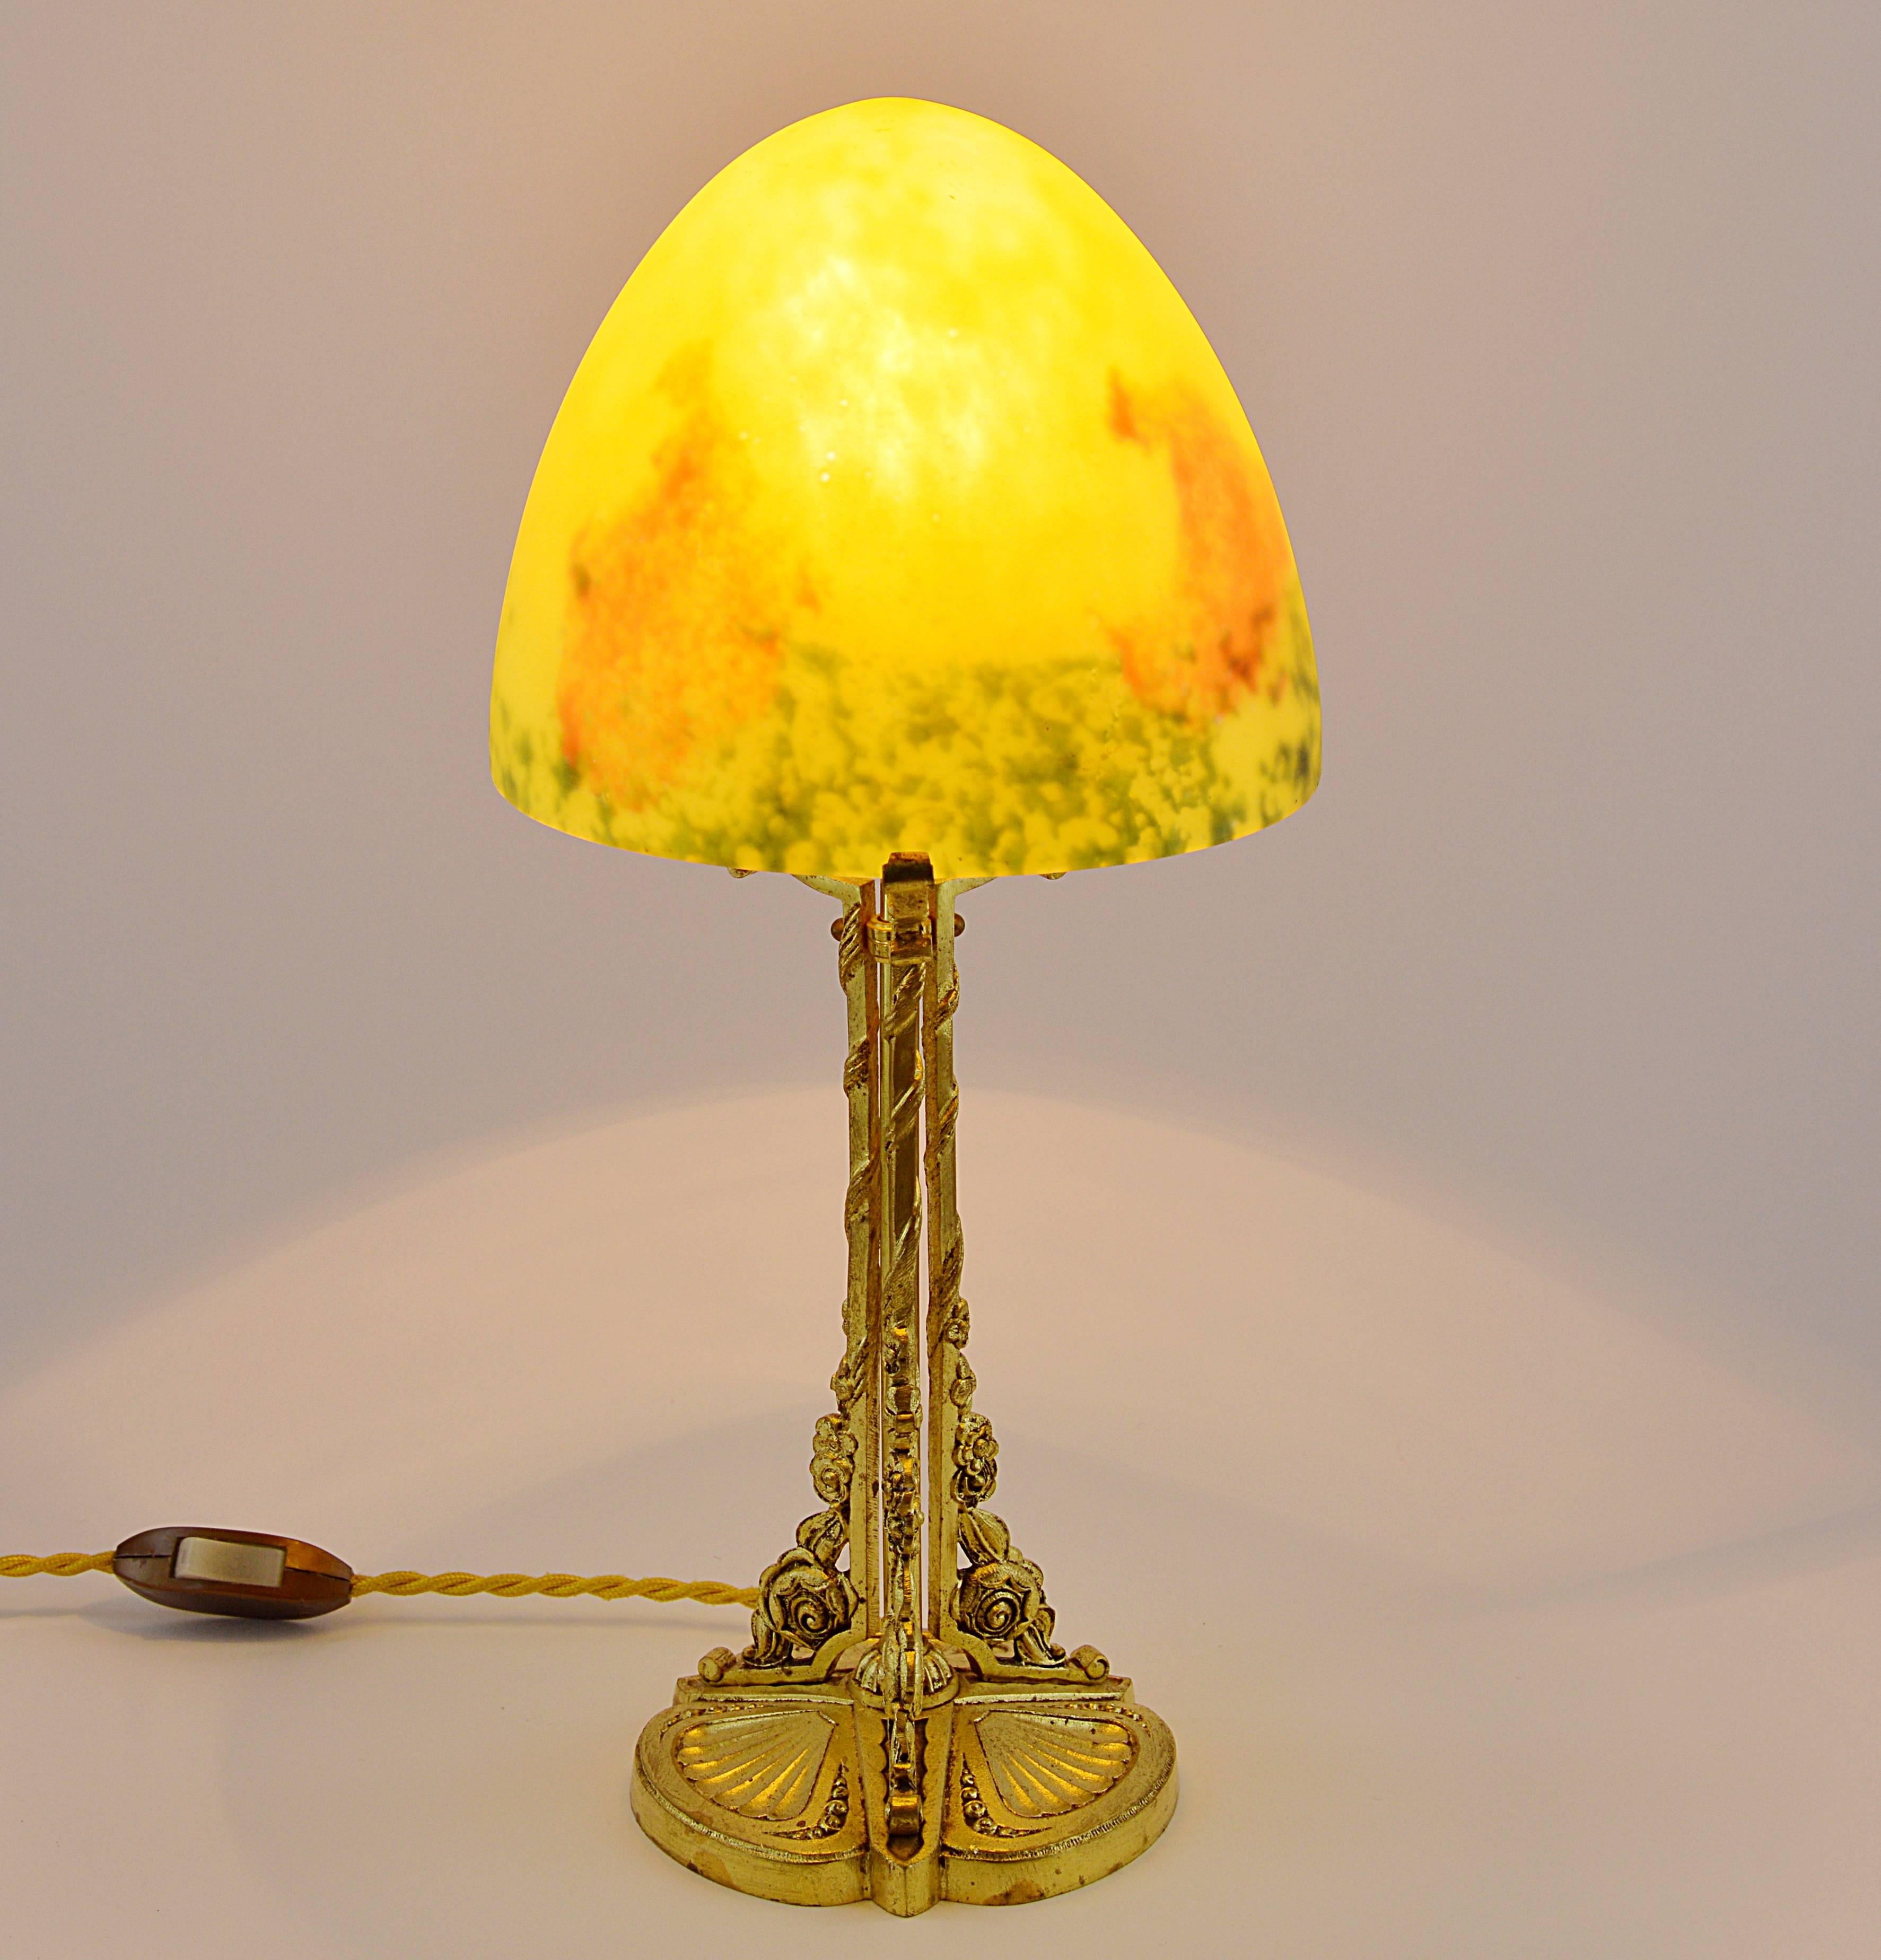 French Art Deco table lamp by Daum (Croismare, Nancy), France, 1920s. Blown double glass shade on its solid bronze base. Enameled colors are inserted between both layers. Enameled signature 